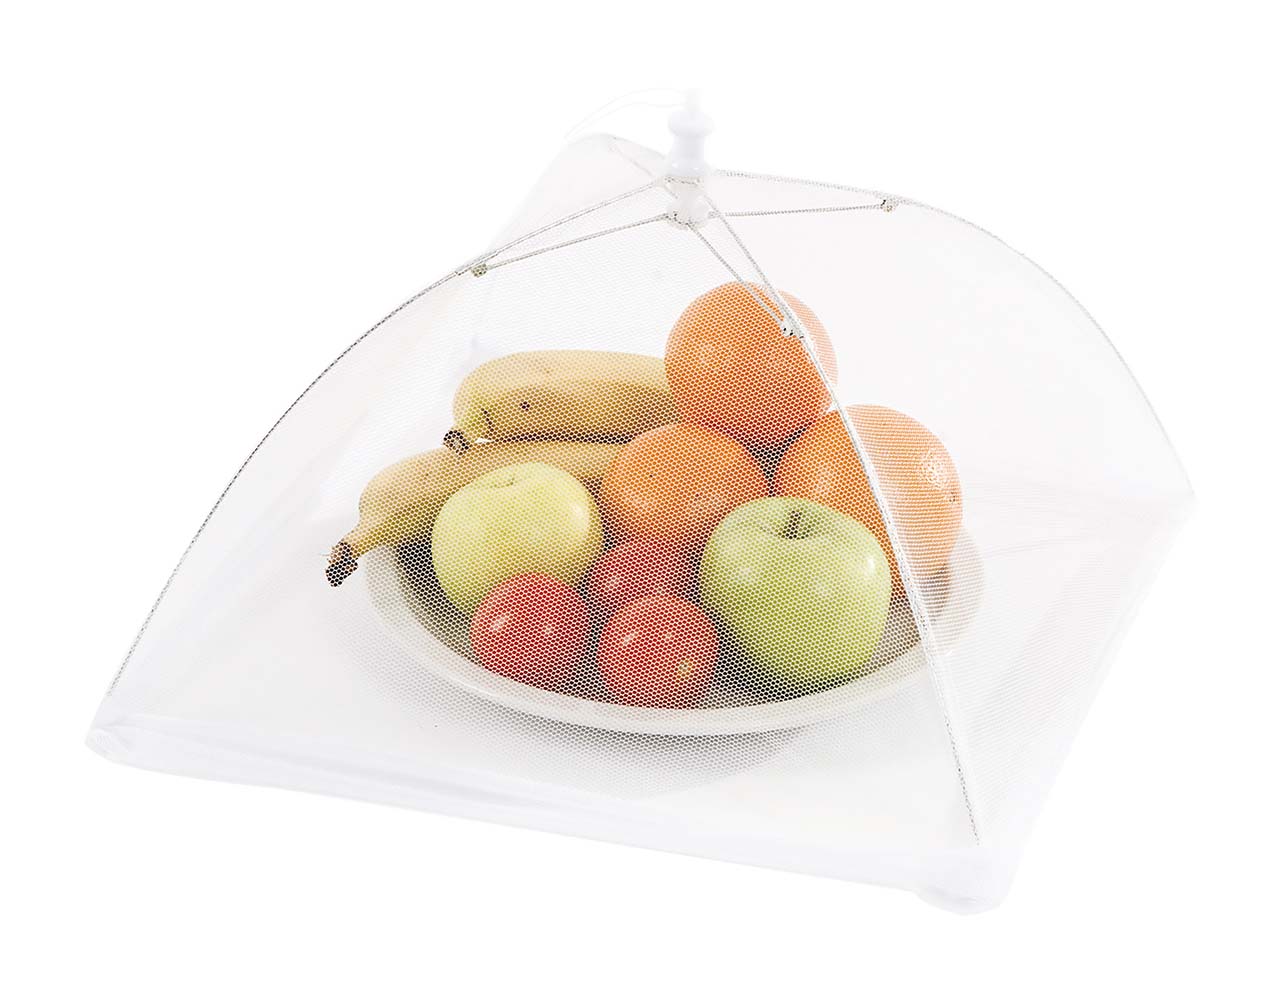 6301555 A collapsible fly screen for food. Protects food from flies or other insects.